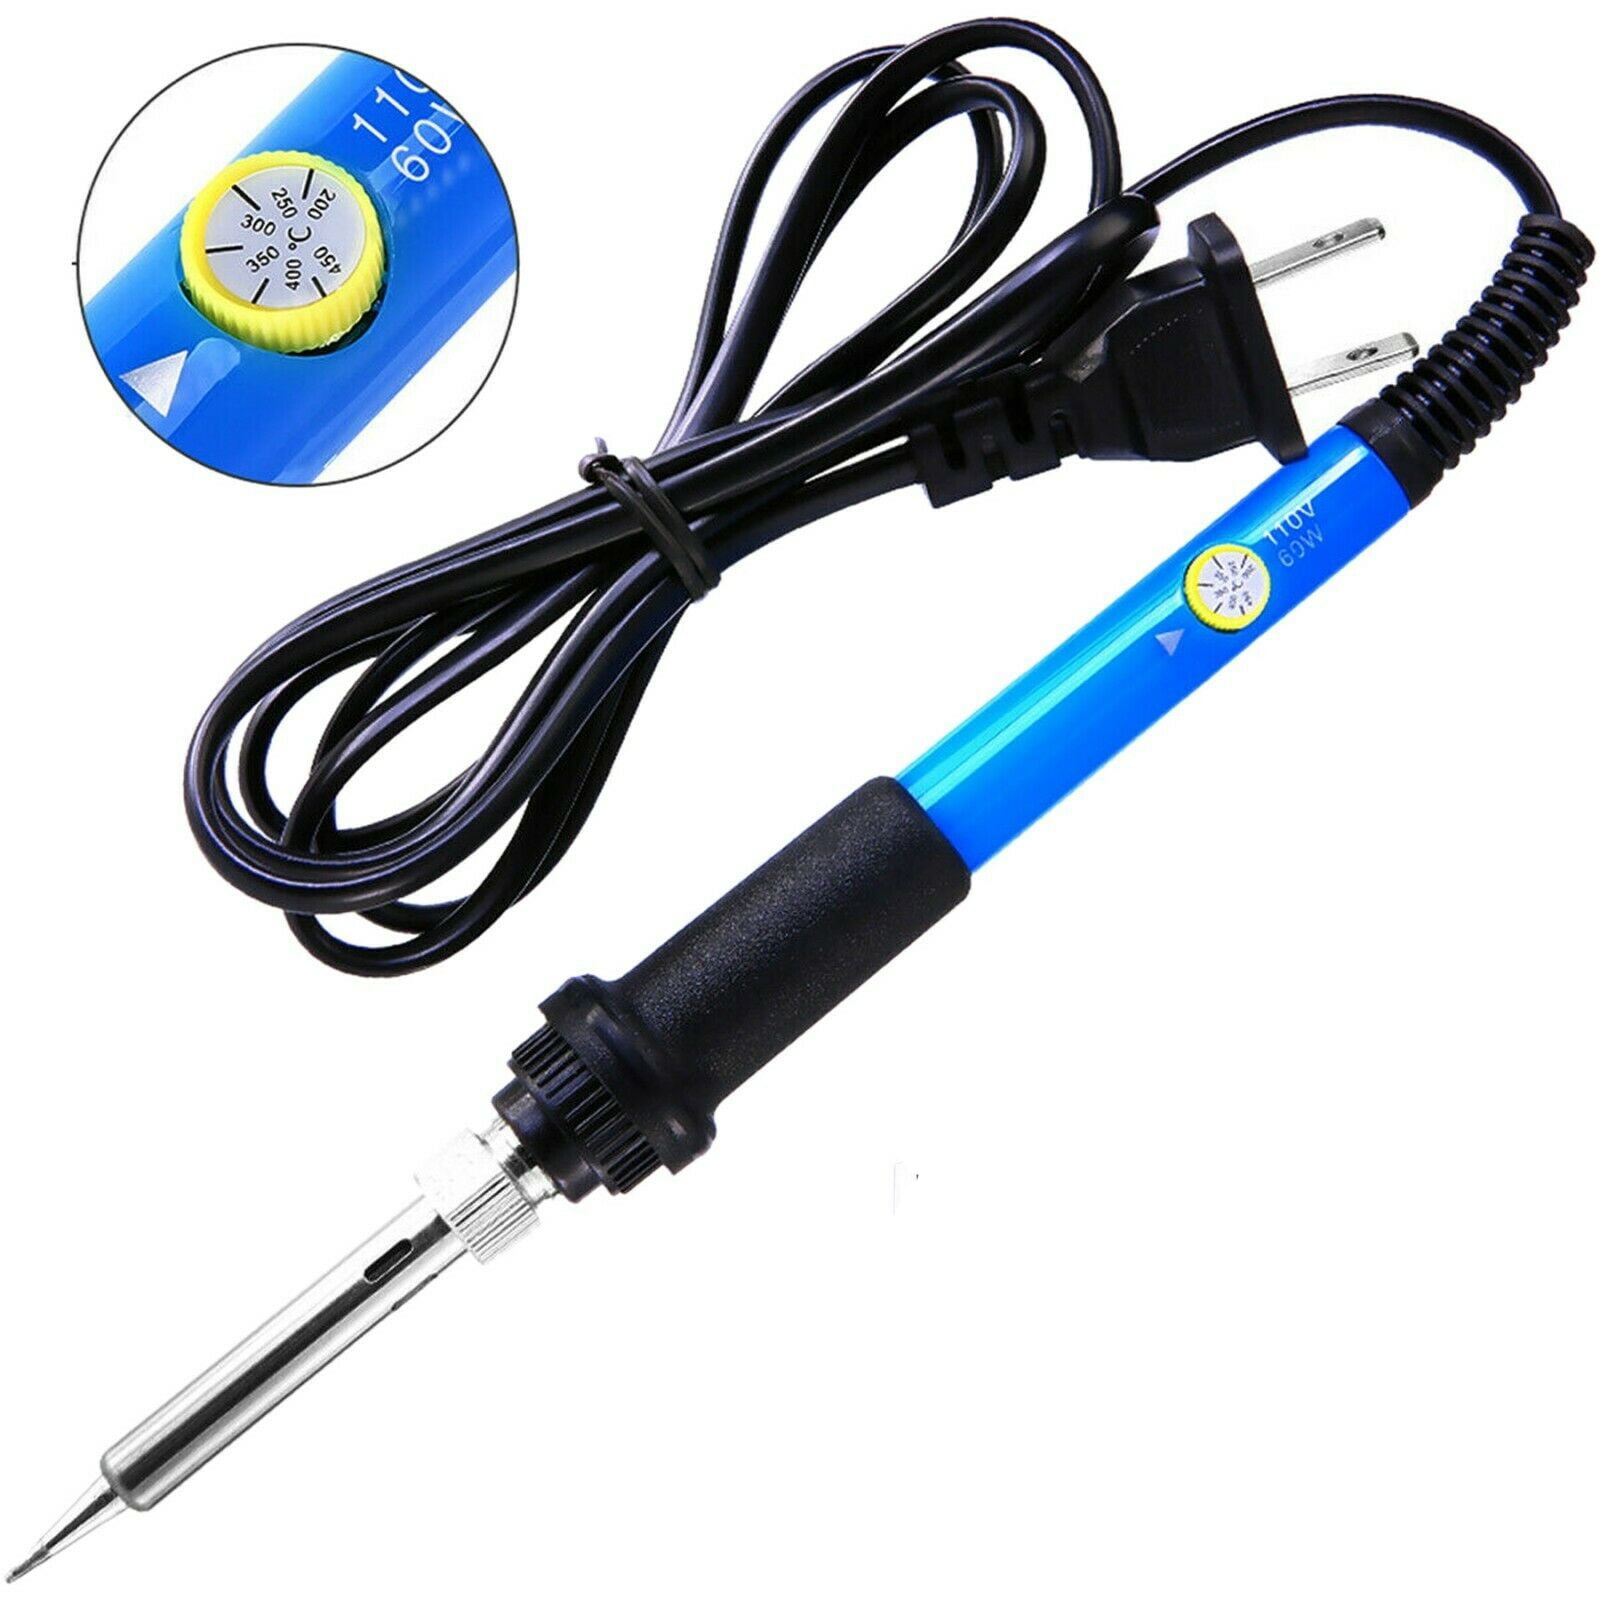 Mains Soldering Iron Kit 30W mains soldering iron with Accessories 